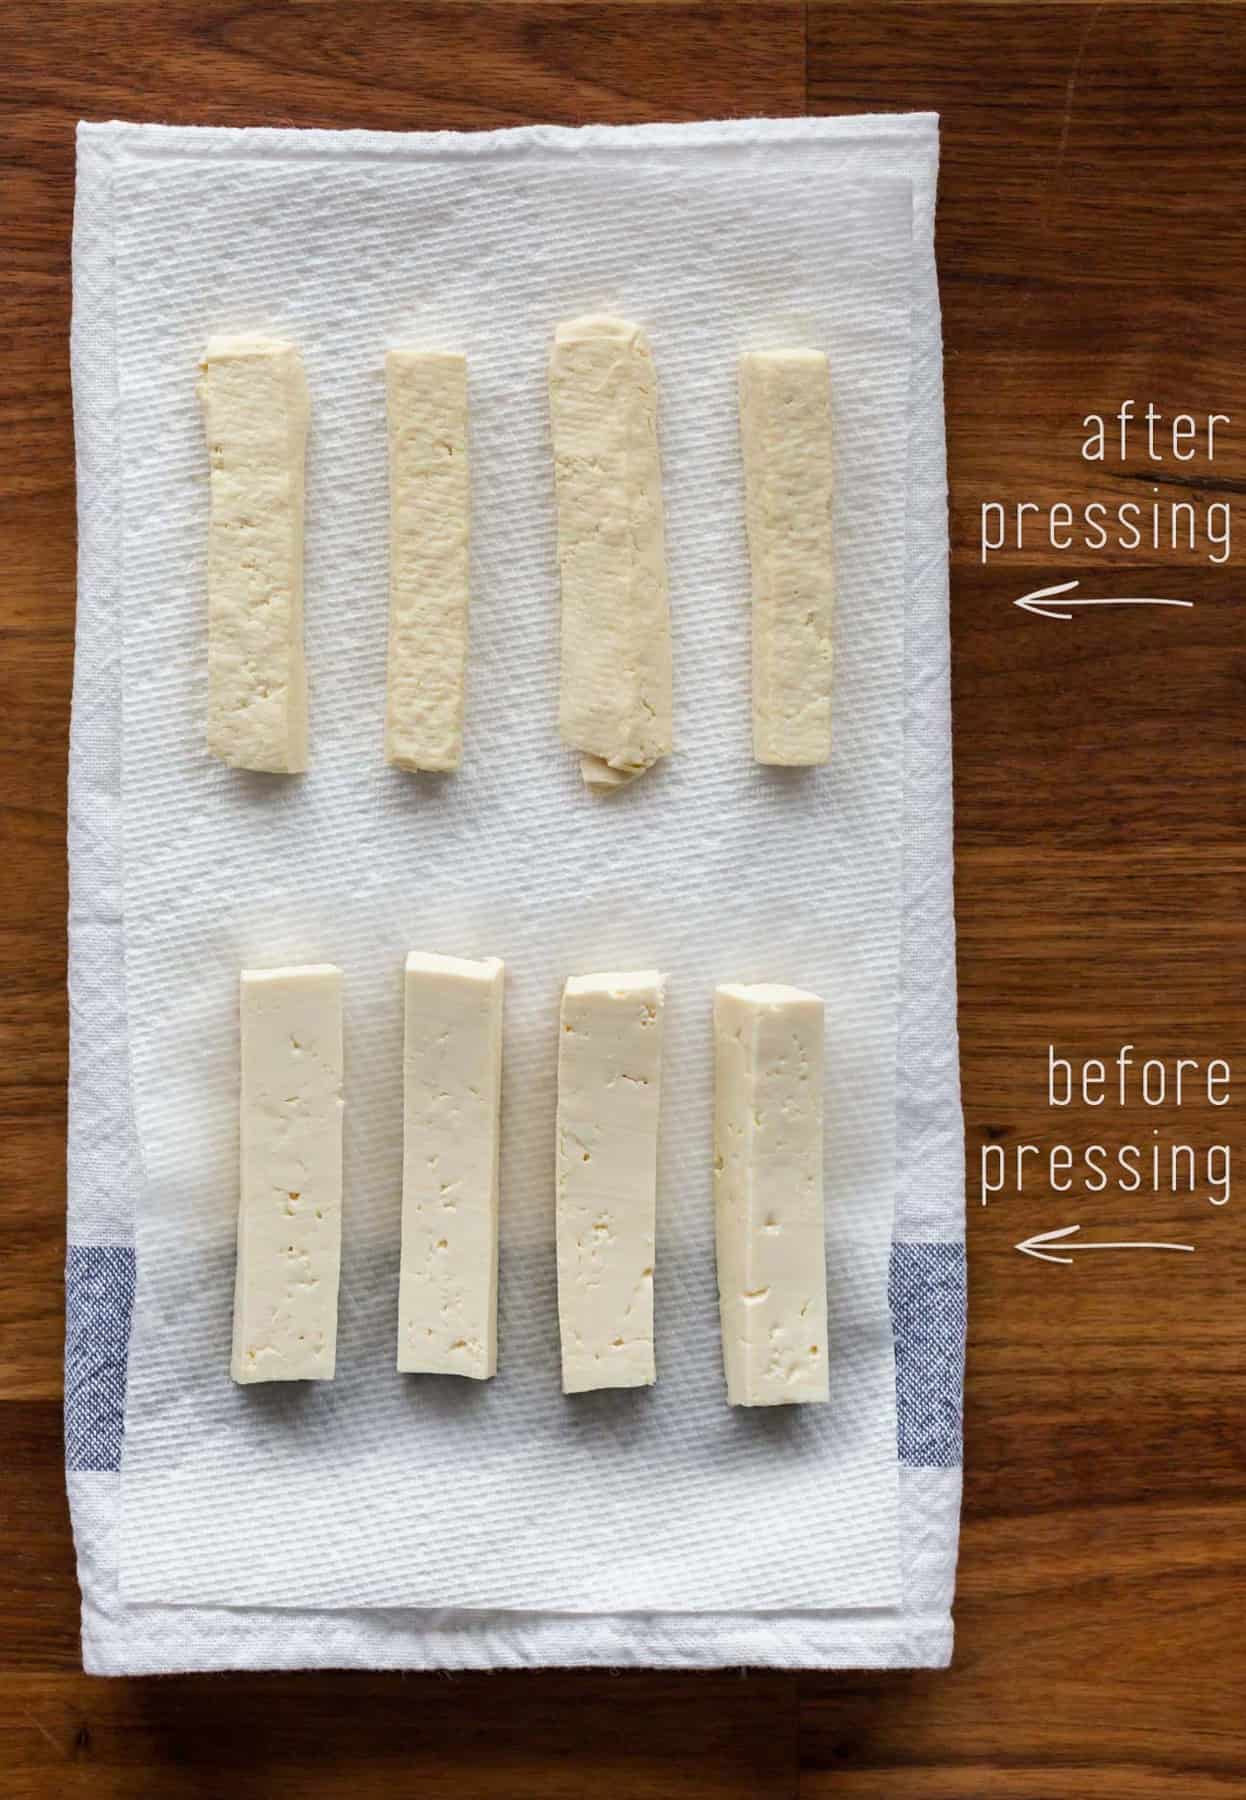 Medium-firm tofu cut into rectangles laying on a kitchen towel. Top row shows pressed tofu (dry to the touch and barely beginning to crumble). Bottom row shows silky, unpressed medium-firm tofu.